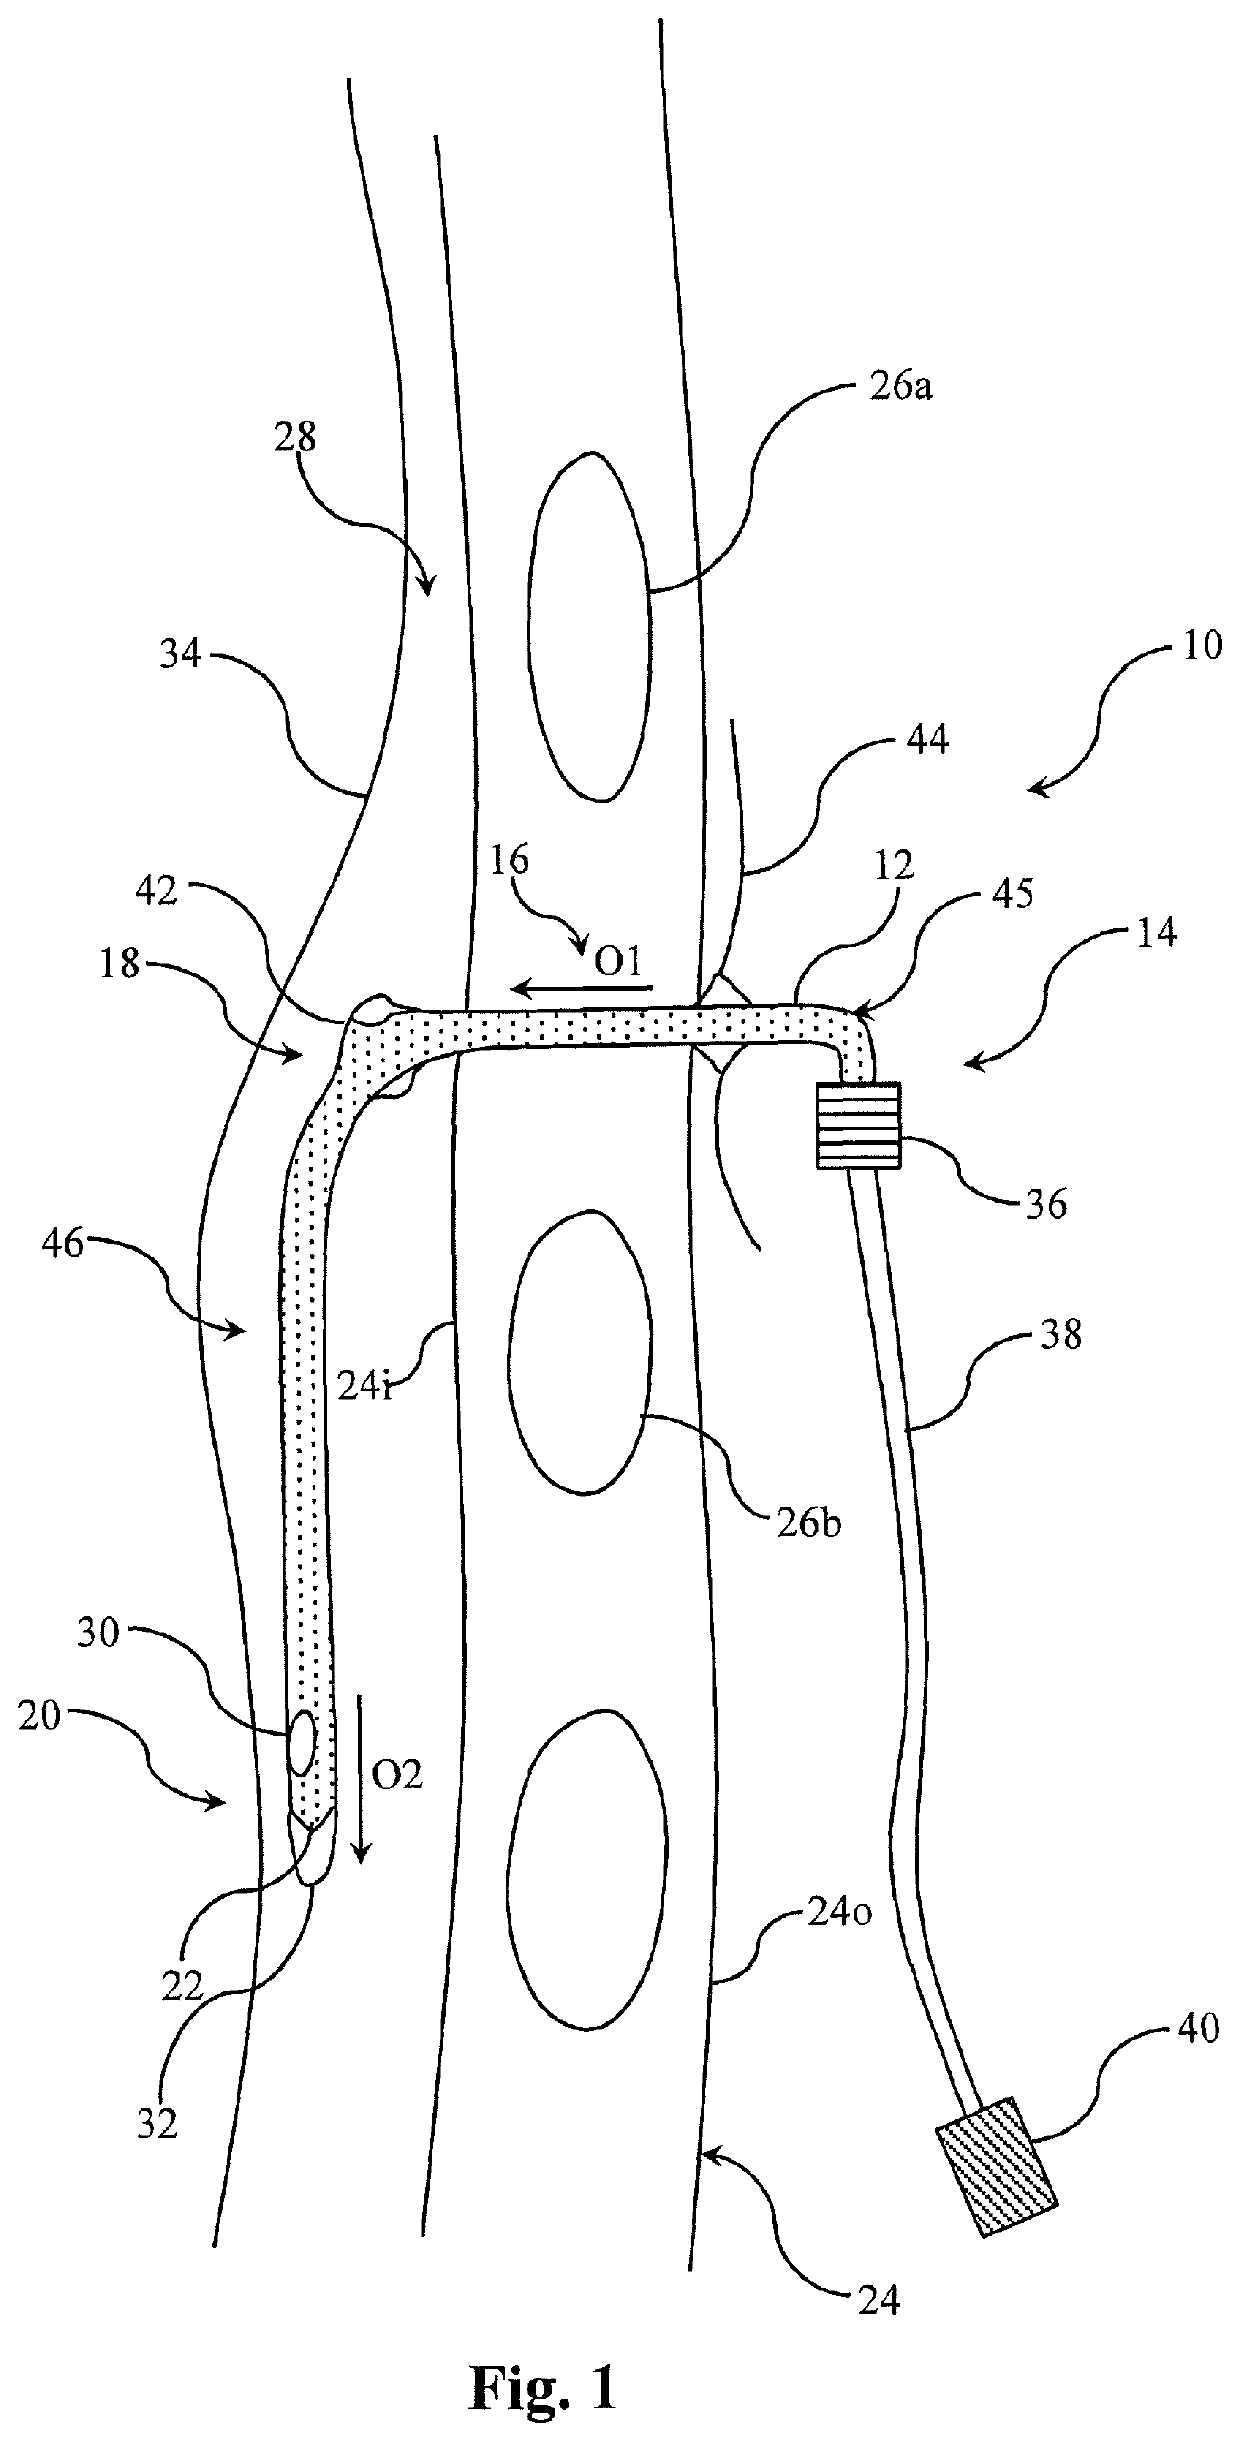 Needle assembly for relieving a pneumothorax